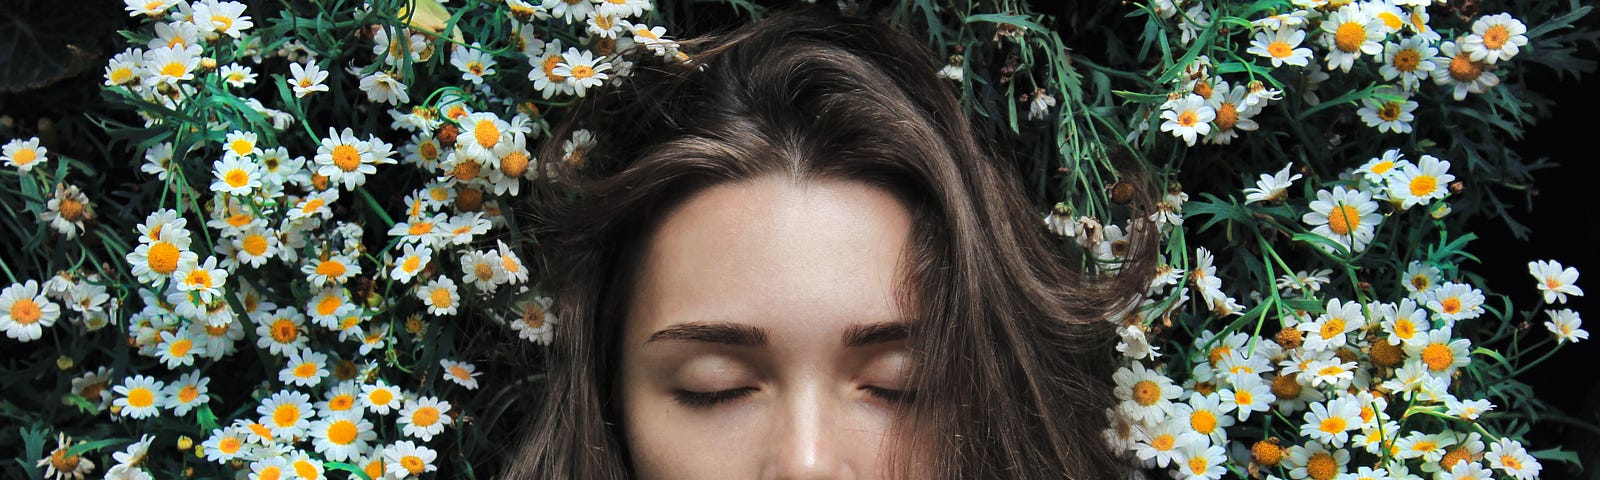 A woman’s face and shoulders, her eyes closed, lying on a bed of flowers